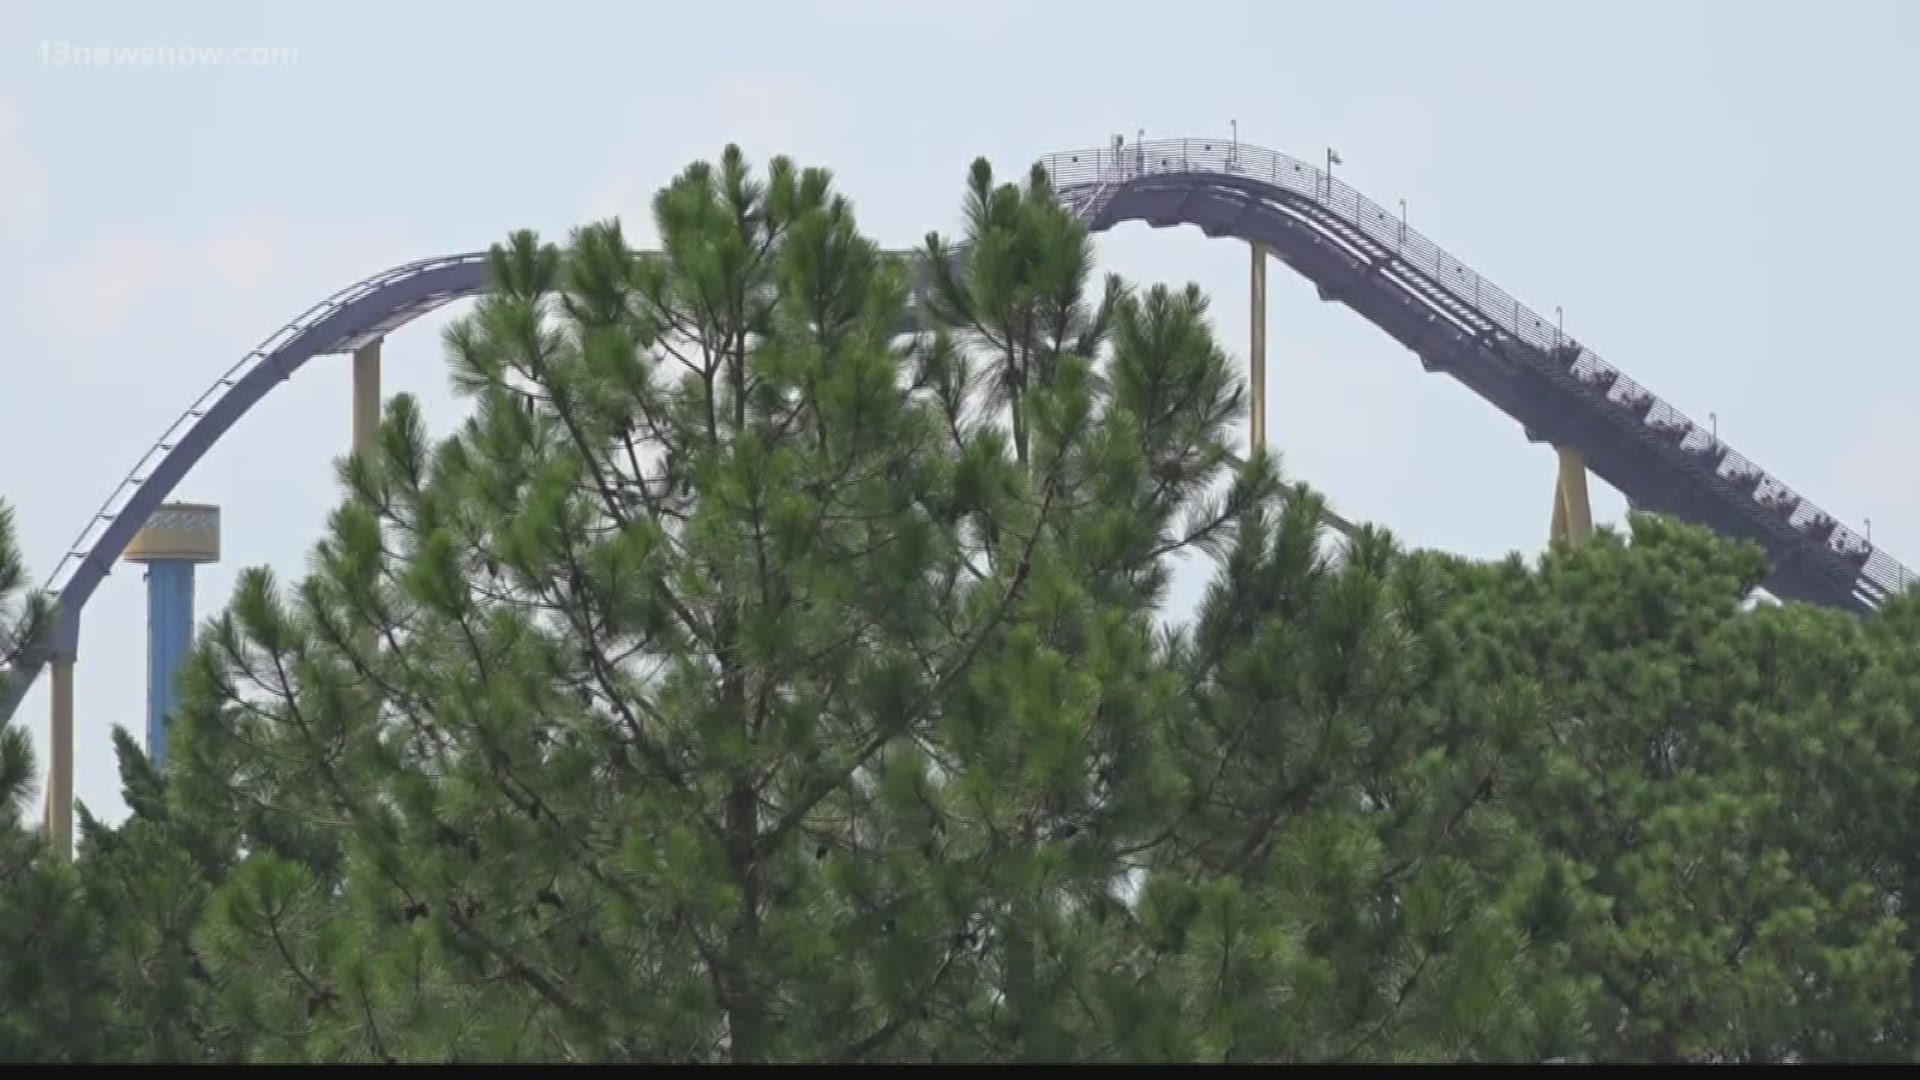 13News Now is learning more about safety inspections at Busch Gardens.